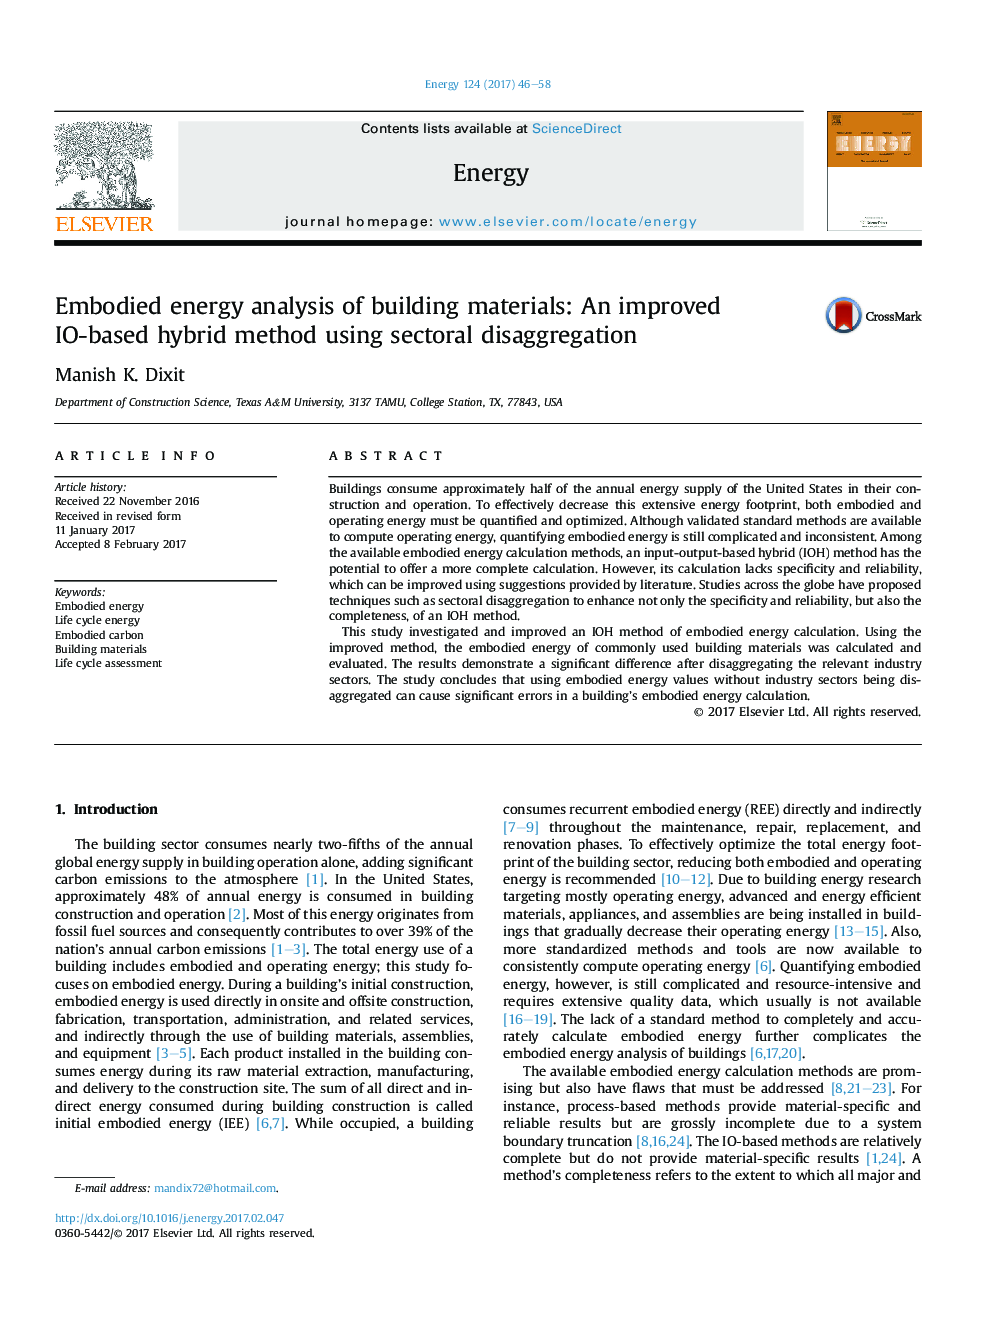 Embodied energy analysis of building materials: An improved IO-based hybrid method using sectoral disaggregation